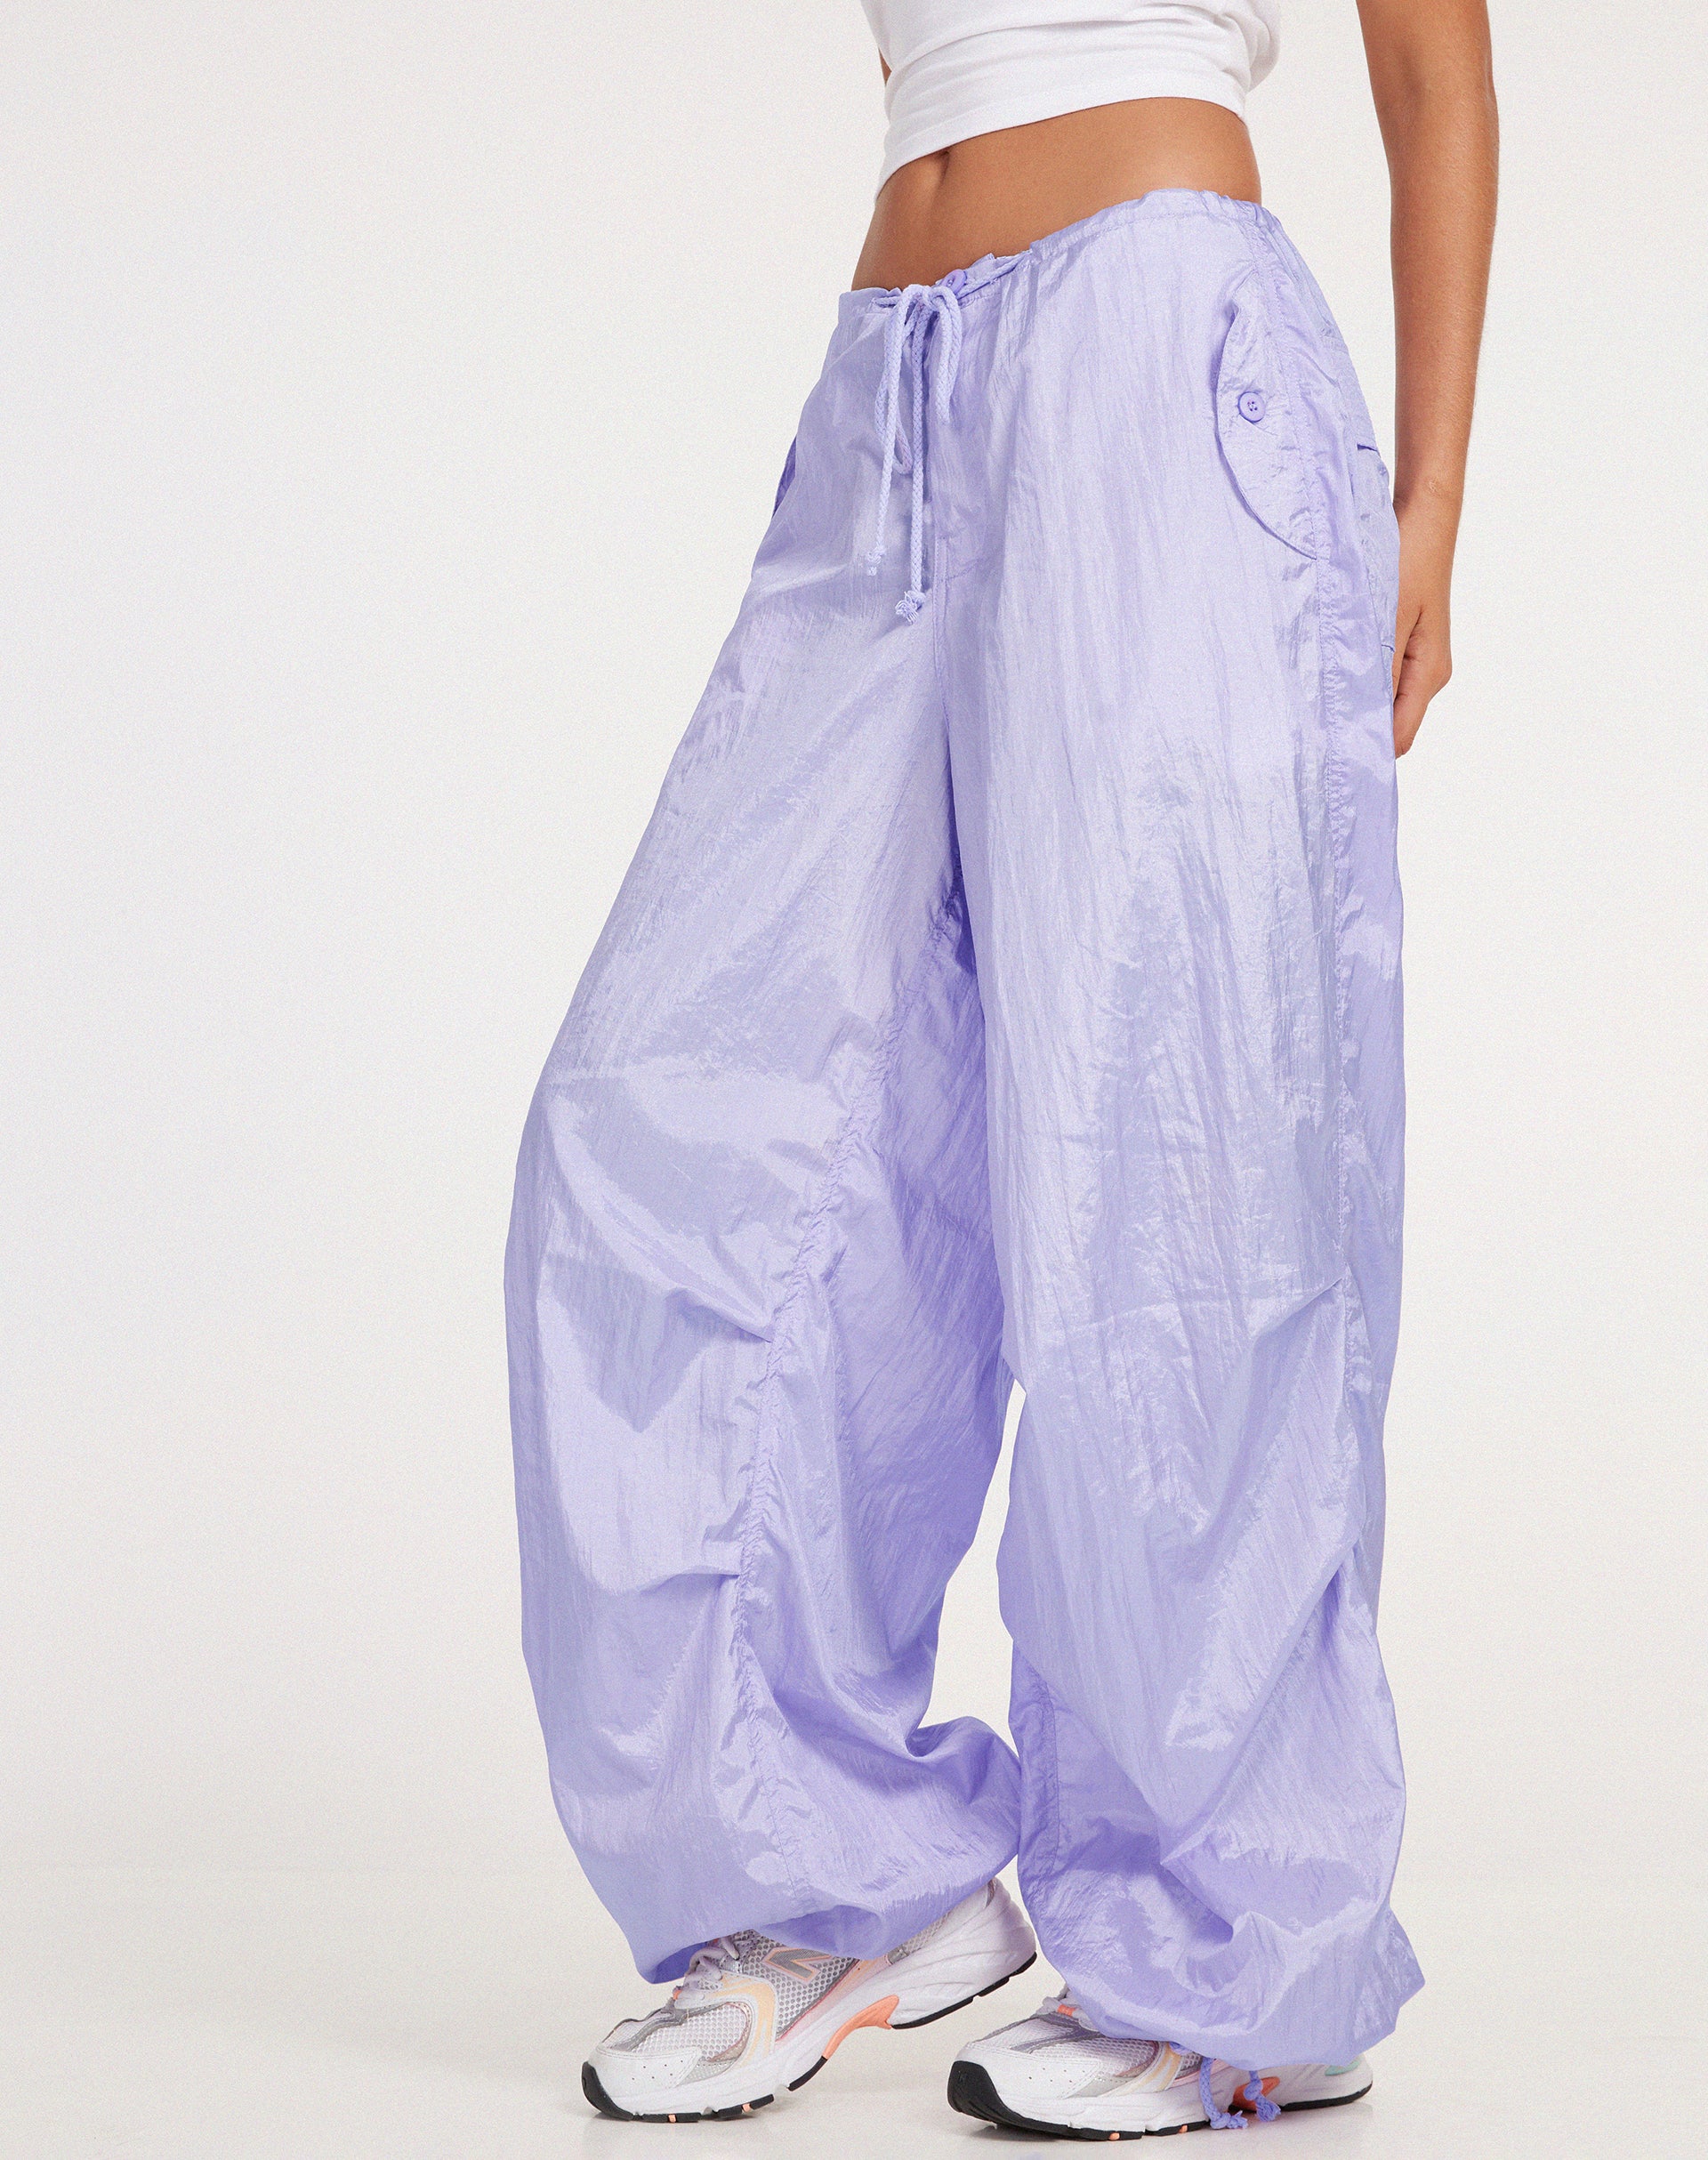 image of Chute Trouser in Lilac